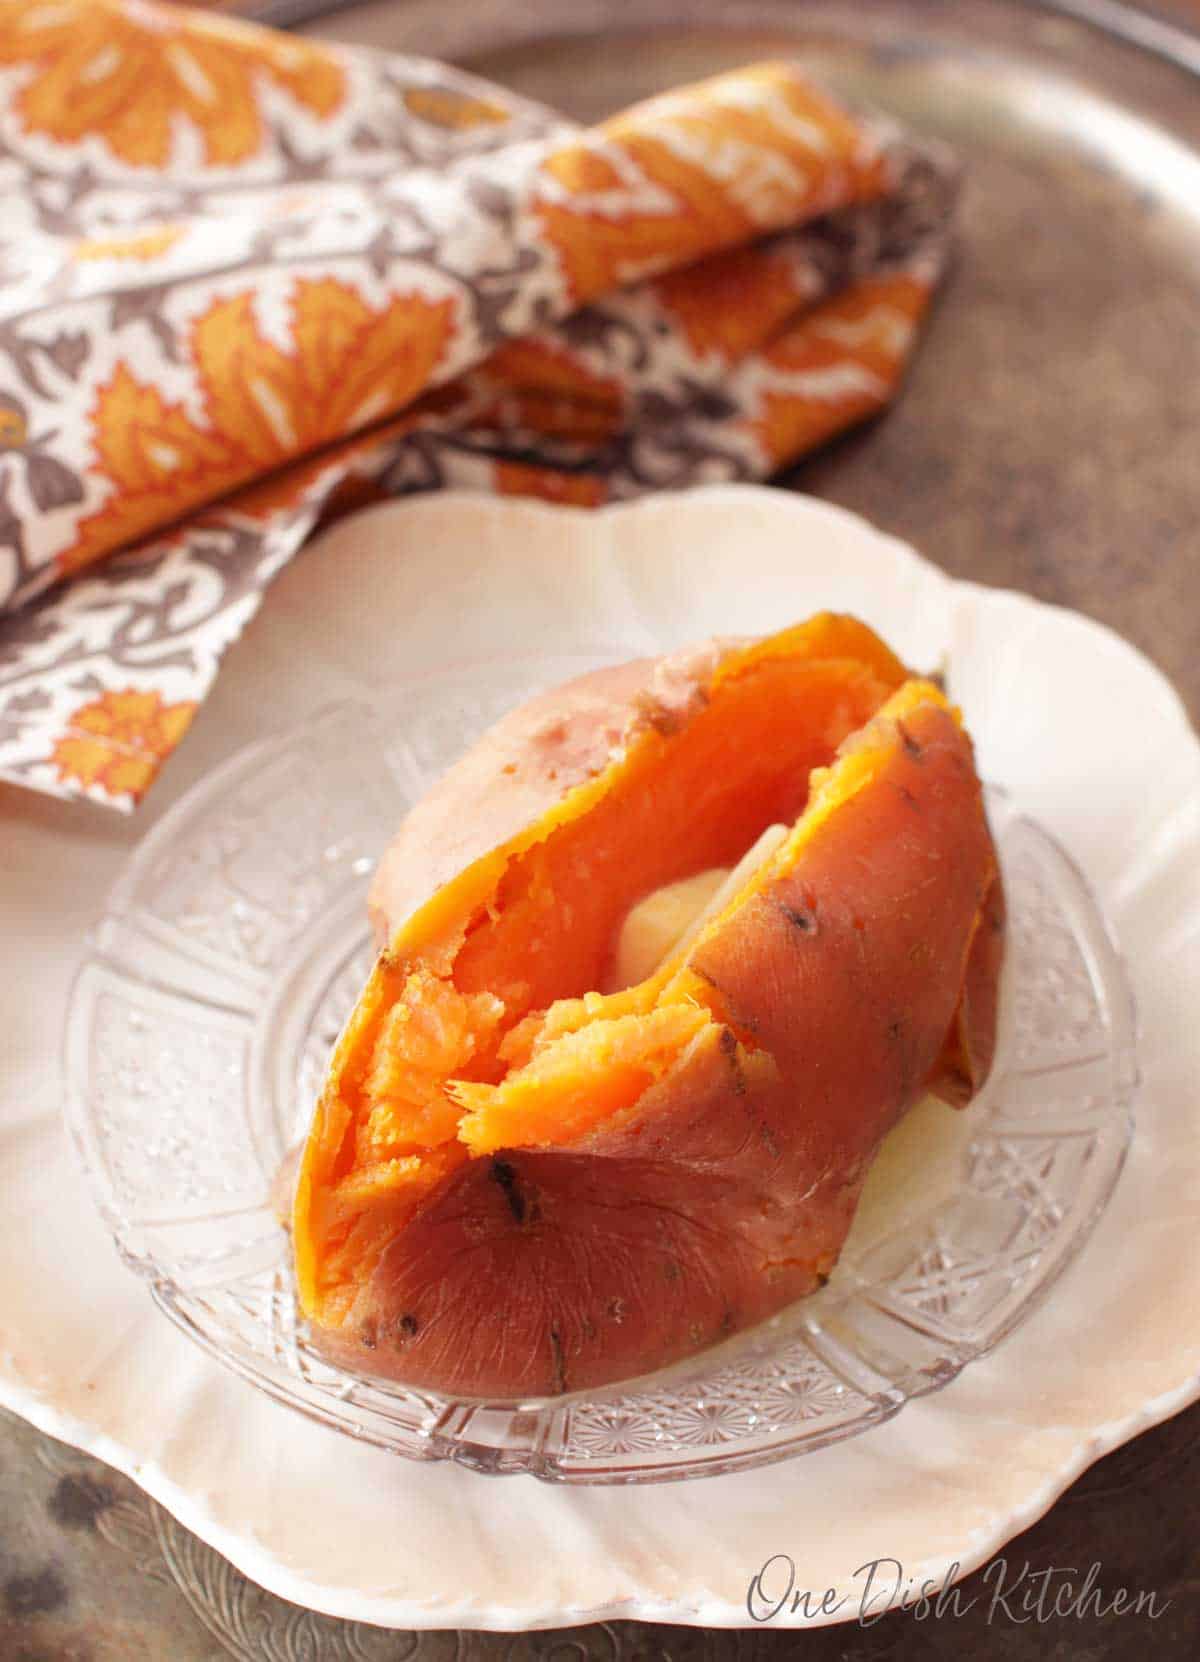 Cooked sweet potato plated on a metal tray with a grey and orange cloth napkin.